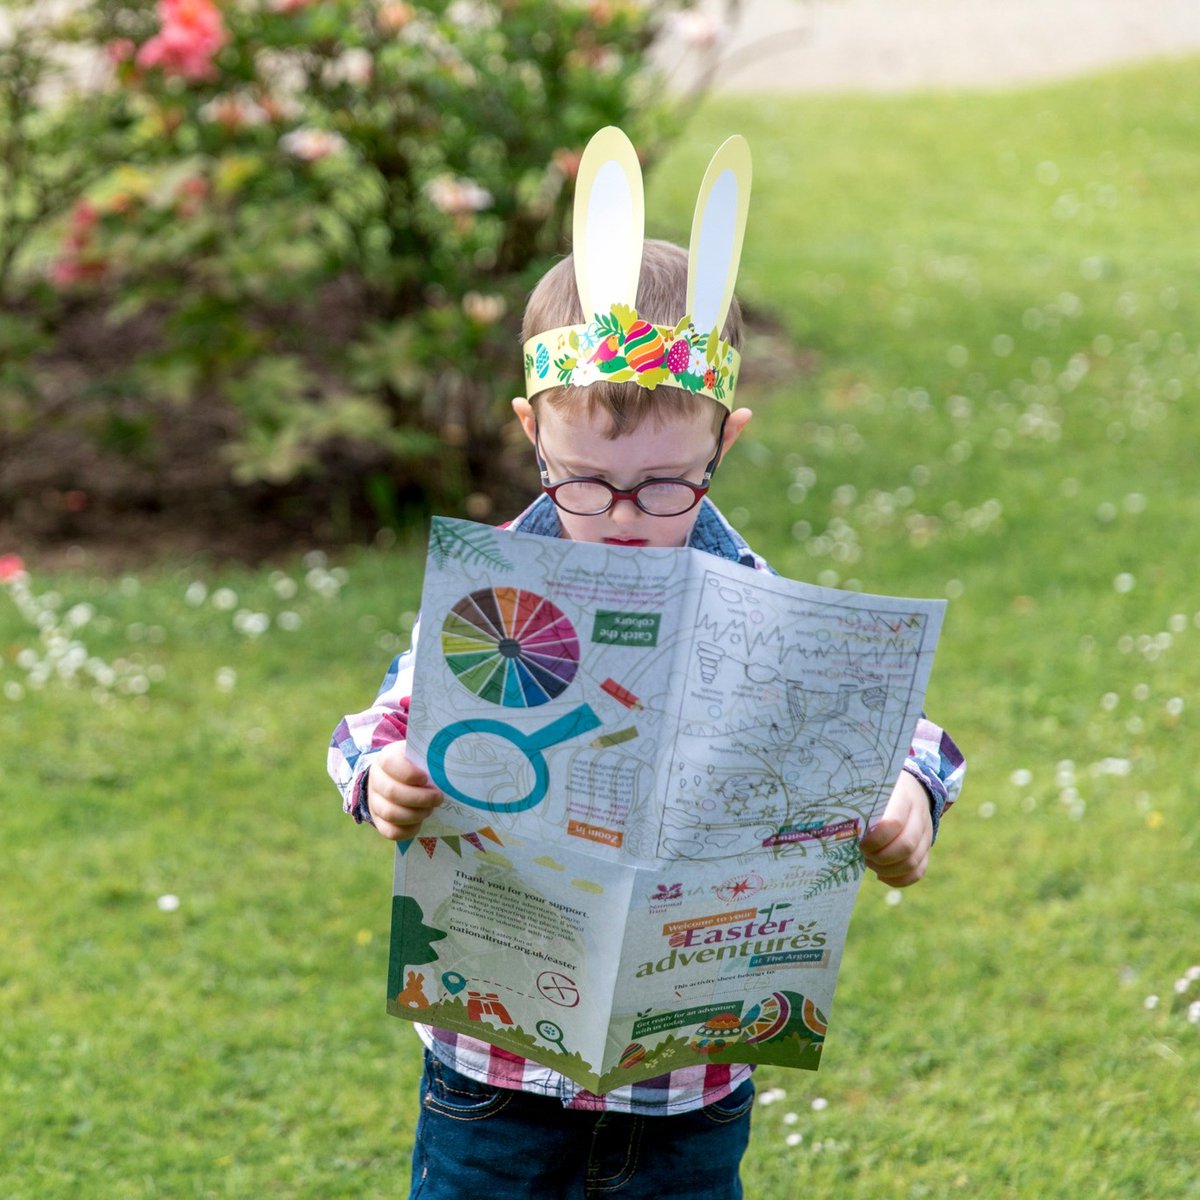 Join us for a spring adventure with our #EasterTrail inspired by Shakespeare's A Midsummer Night's Dream 🐣 24 March - 1 April (Wed-Sun, incl. Bank Holiday Mon) 🐰£3 per trail @southeastNT @MyTenterden